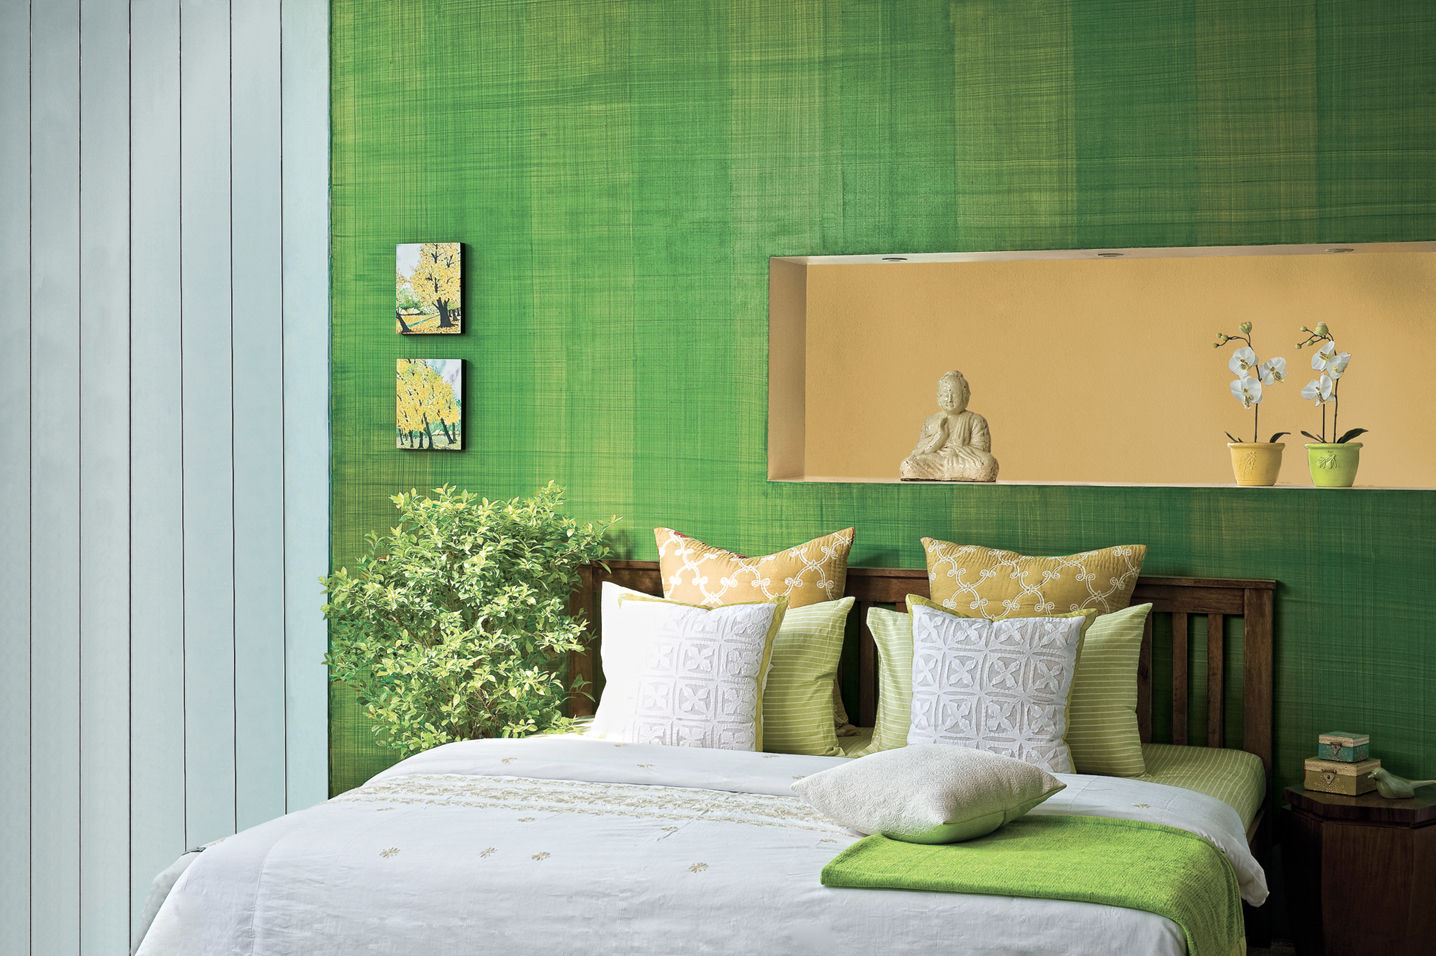 Tropical Spaces, Papersky Studio Papersky Studio Tropical style bedroom Furniture,Building,Green,Comfort,Azure,Wood,Textile,Plant,Architecture,Interior design